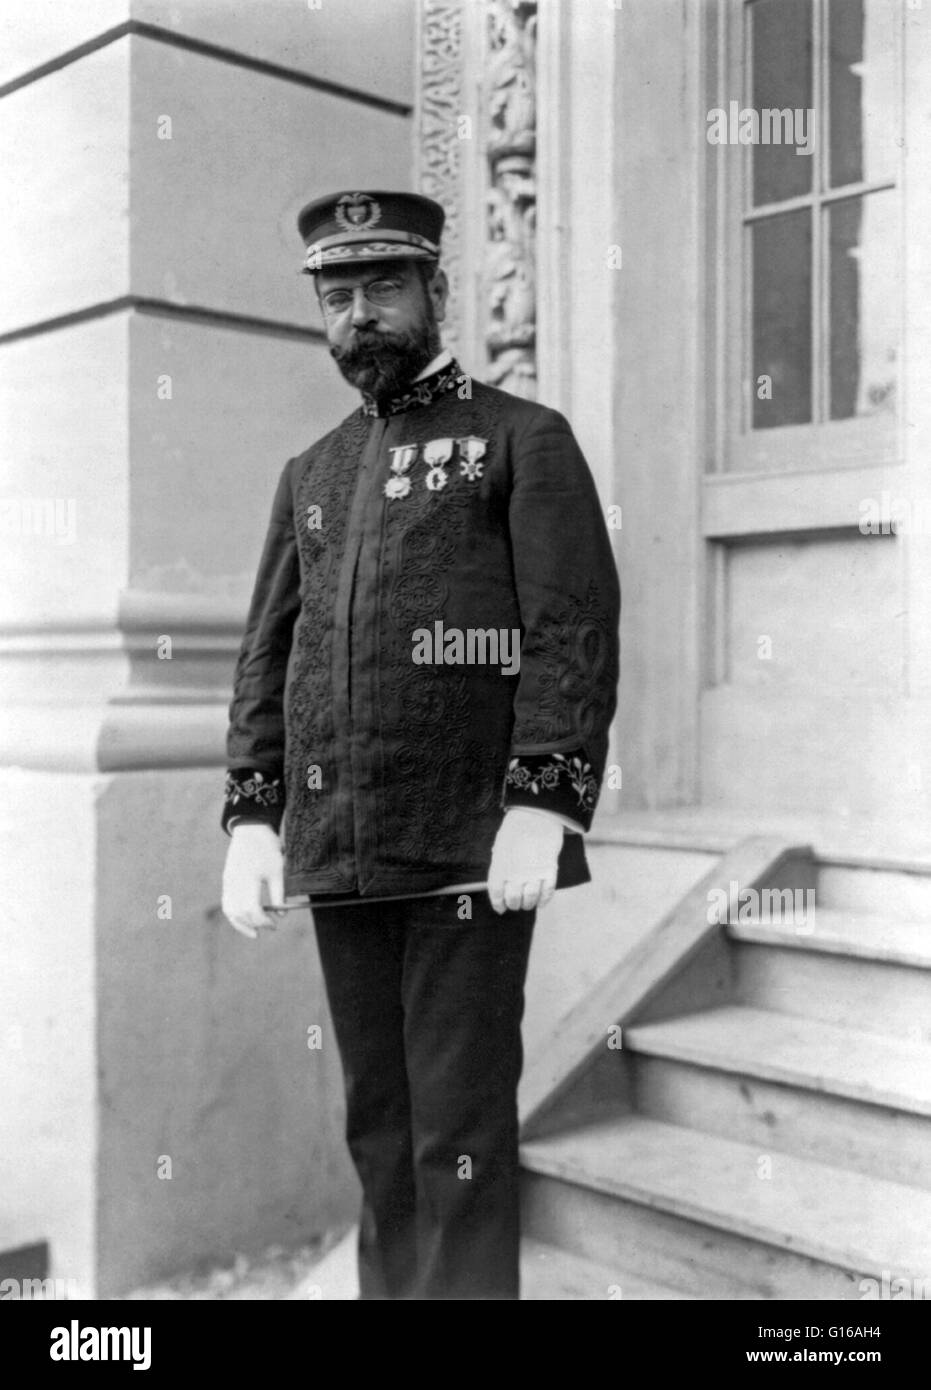 Sousa photographed by Frances 'Fannie' Benjamin Johnston in 1904. John Philip Sousa (November 6, 1854 - March 6, 1932) was an American composer and conductor of the late Romantic era, known primarily for American military and patriotic marches. He began h Stock Photo